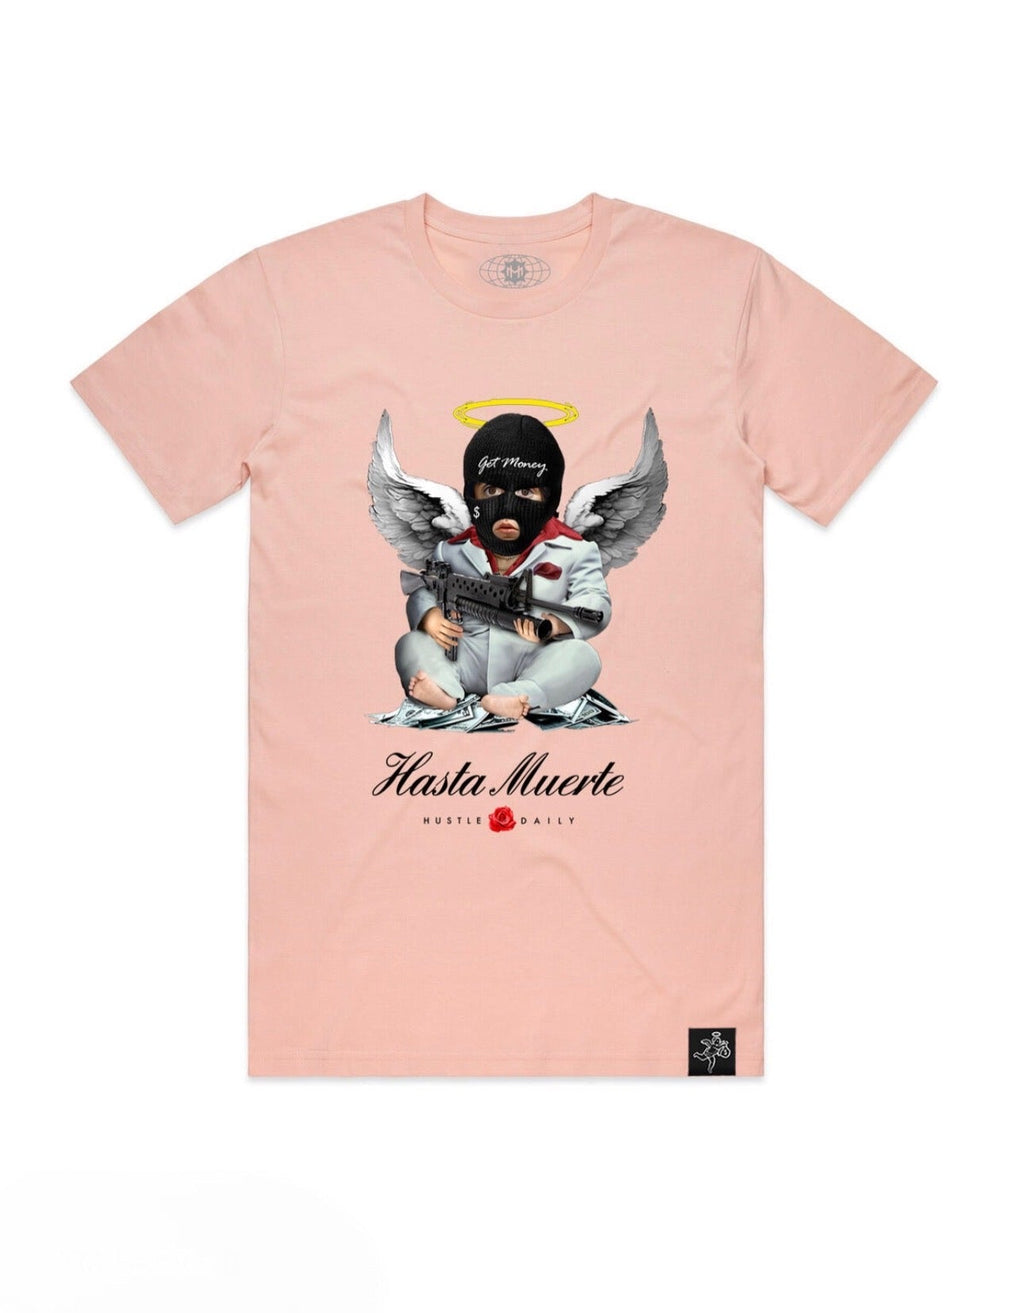 Hasta muerte (pink two mask angel t-shirt) – Vip Clothing Stores